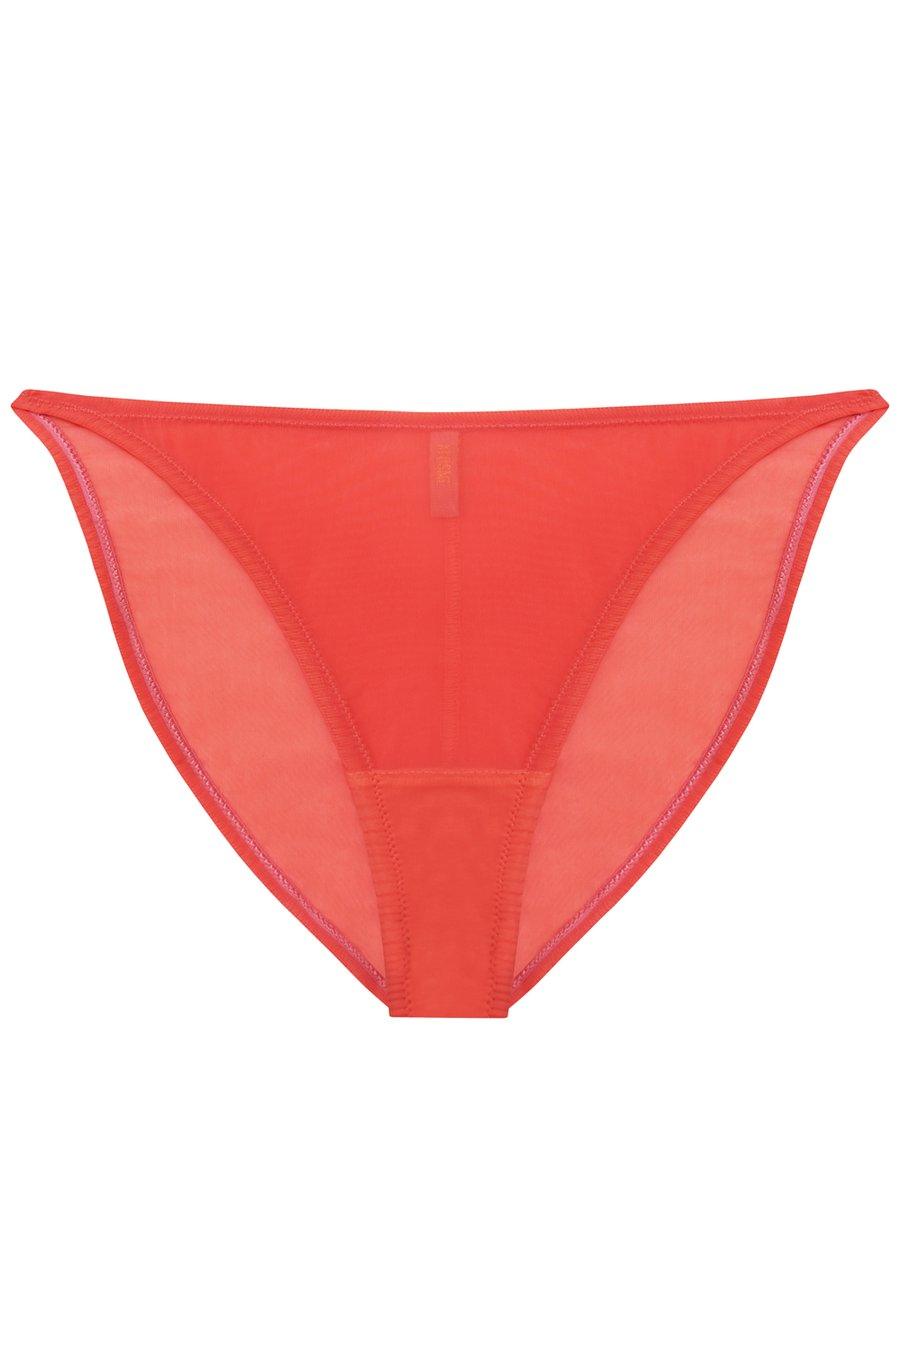 Constance Tangerine high-waisted panties - Slip panties by More! Keòsme. Shop on yesUndress